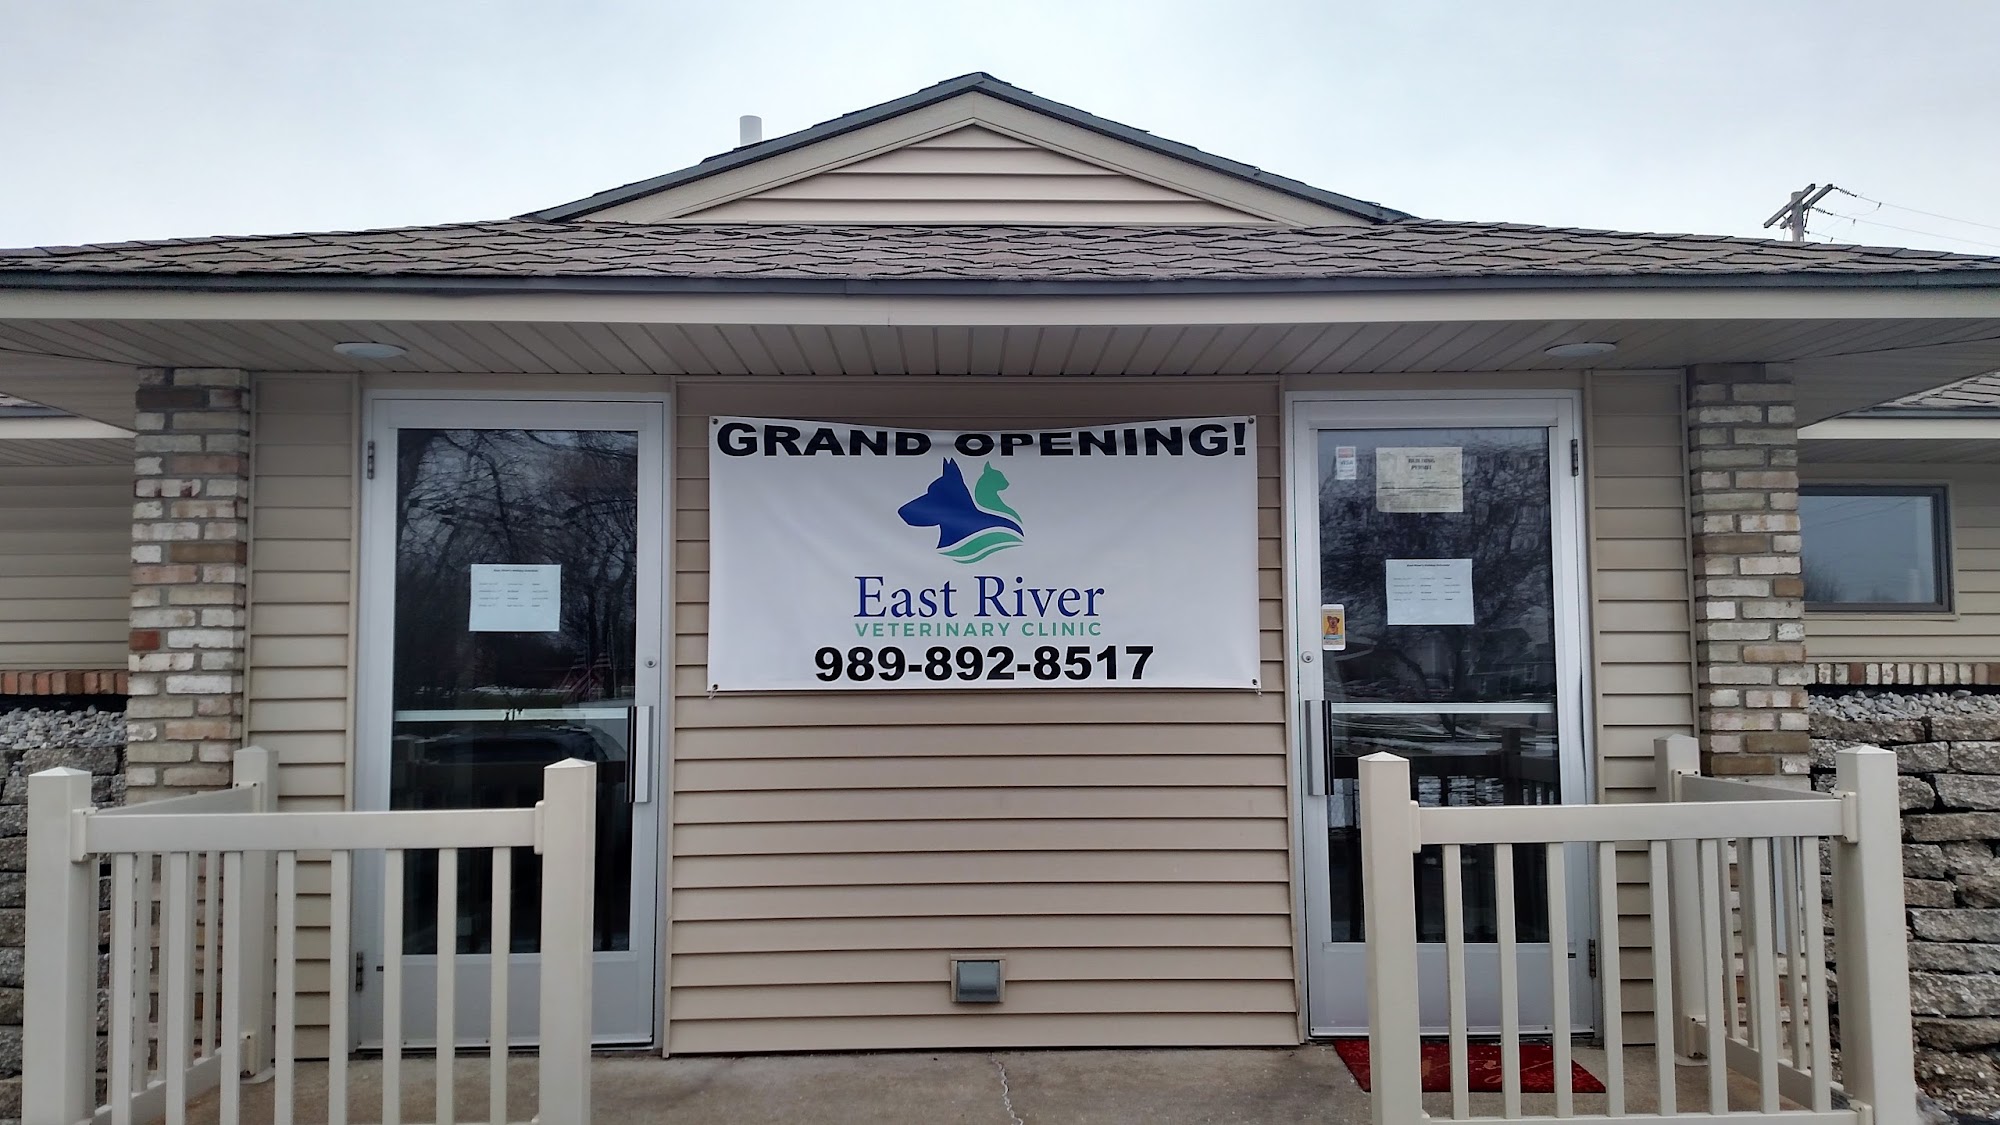 East River Veterinary Clinic